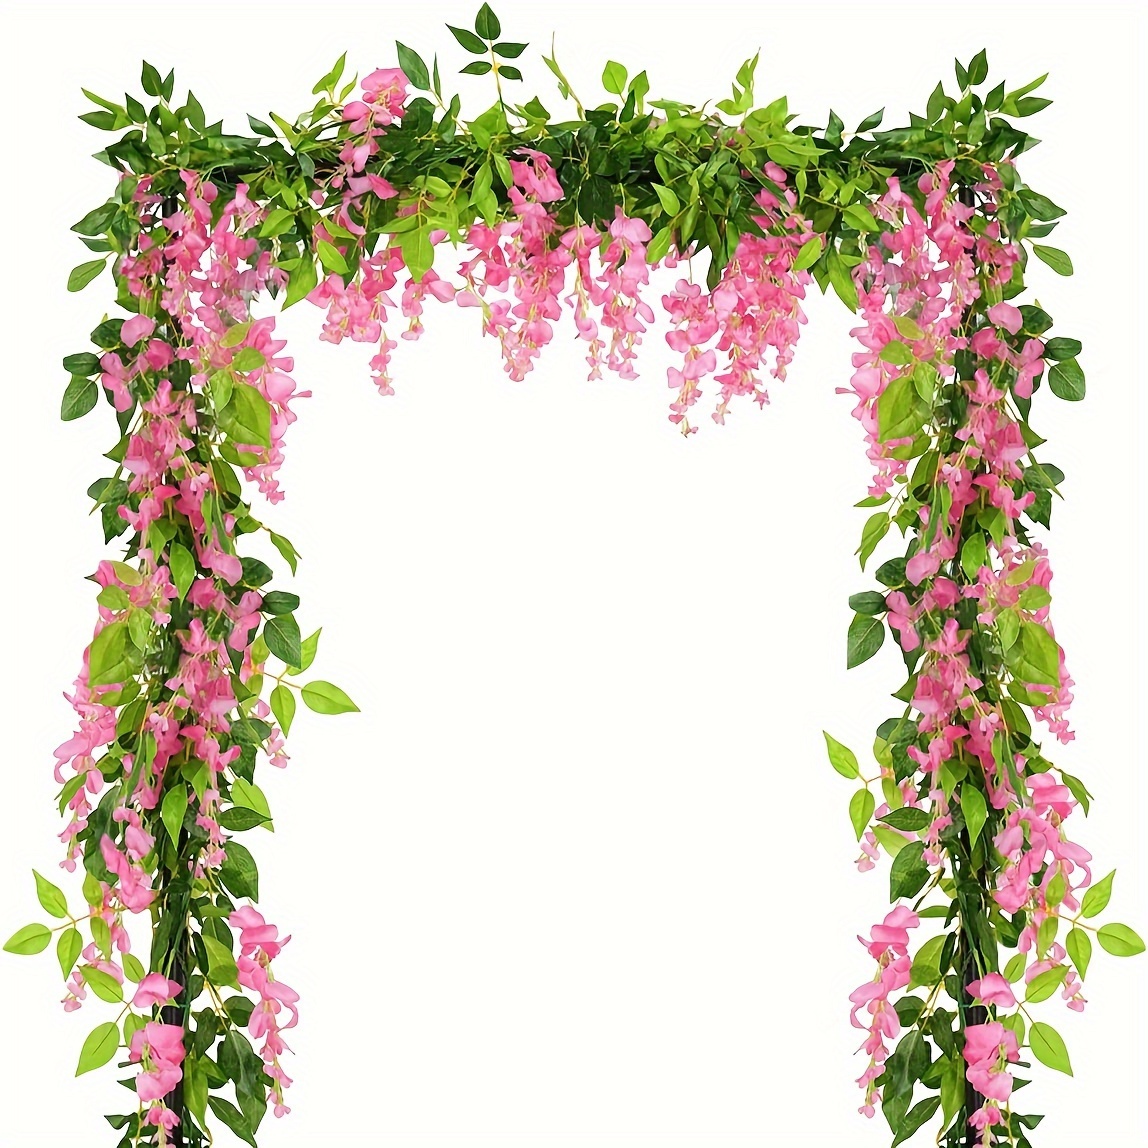 

1pc Artificial Flowers Wisteria Garland Vine Rattan Hanging For Home Garden Ceremony Wedding Arch Floral Decor